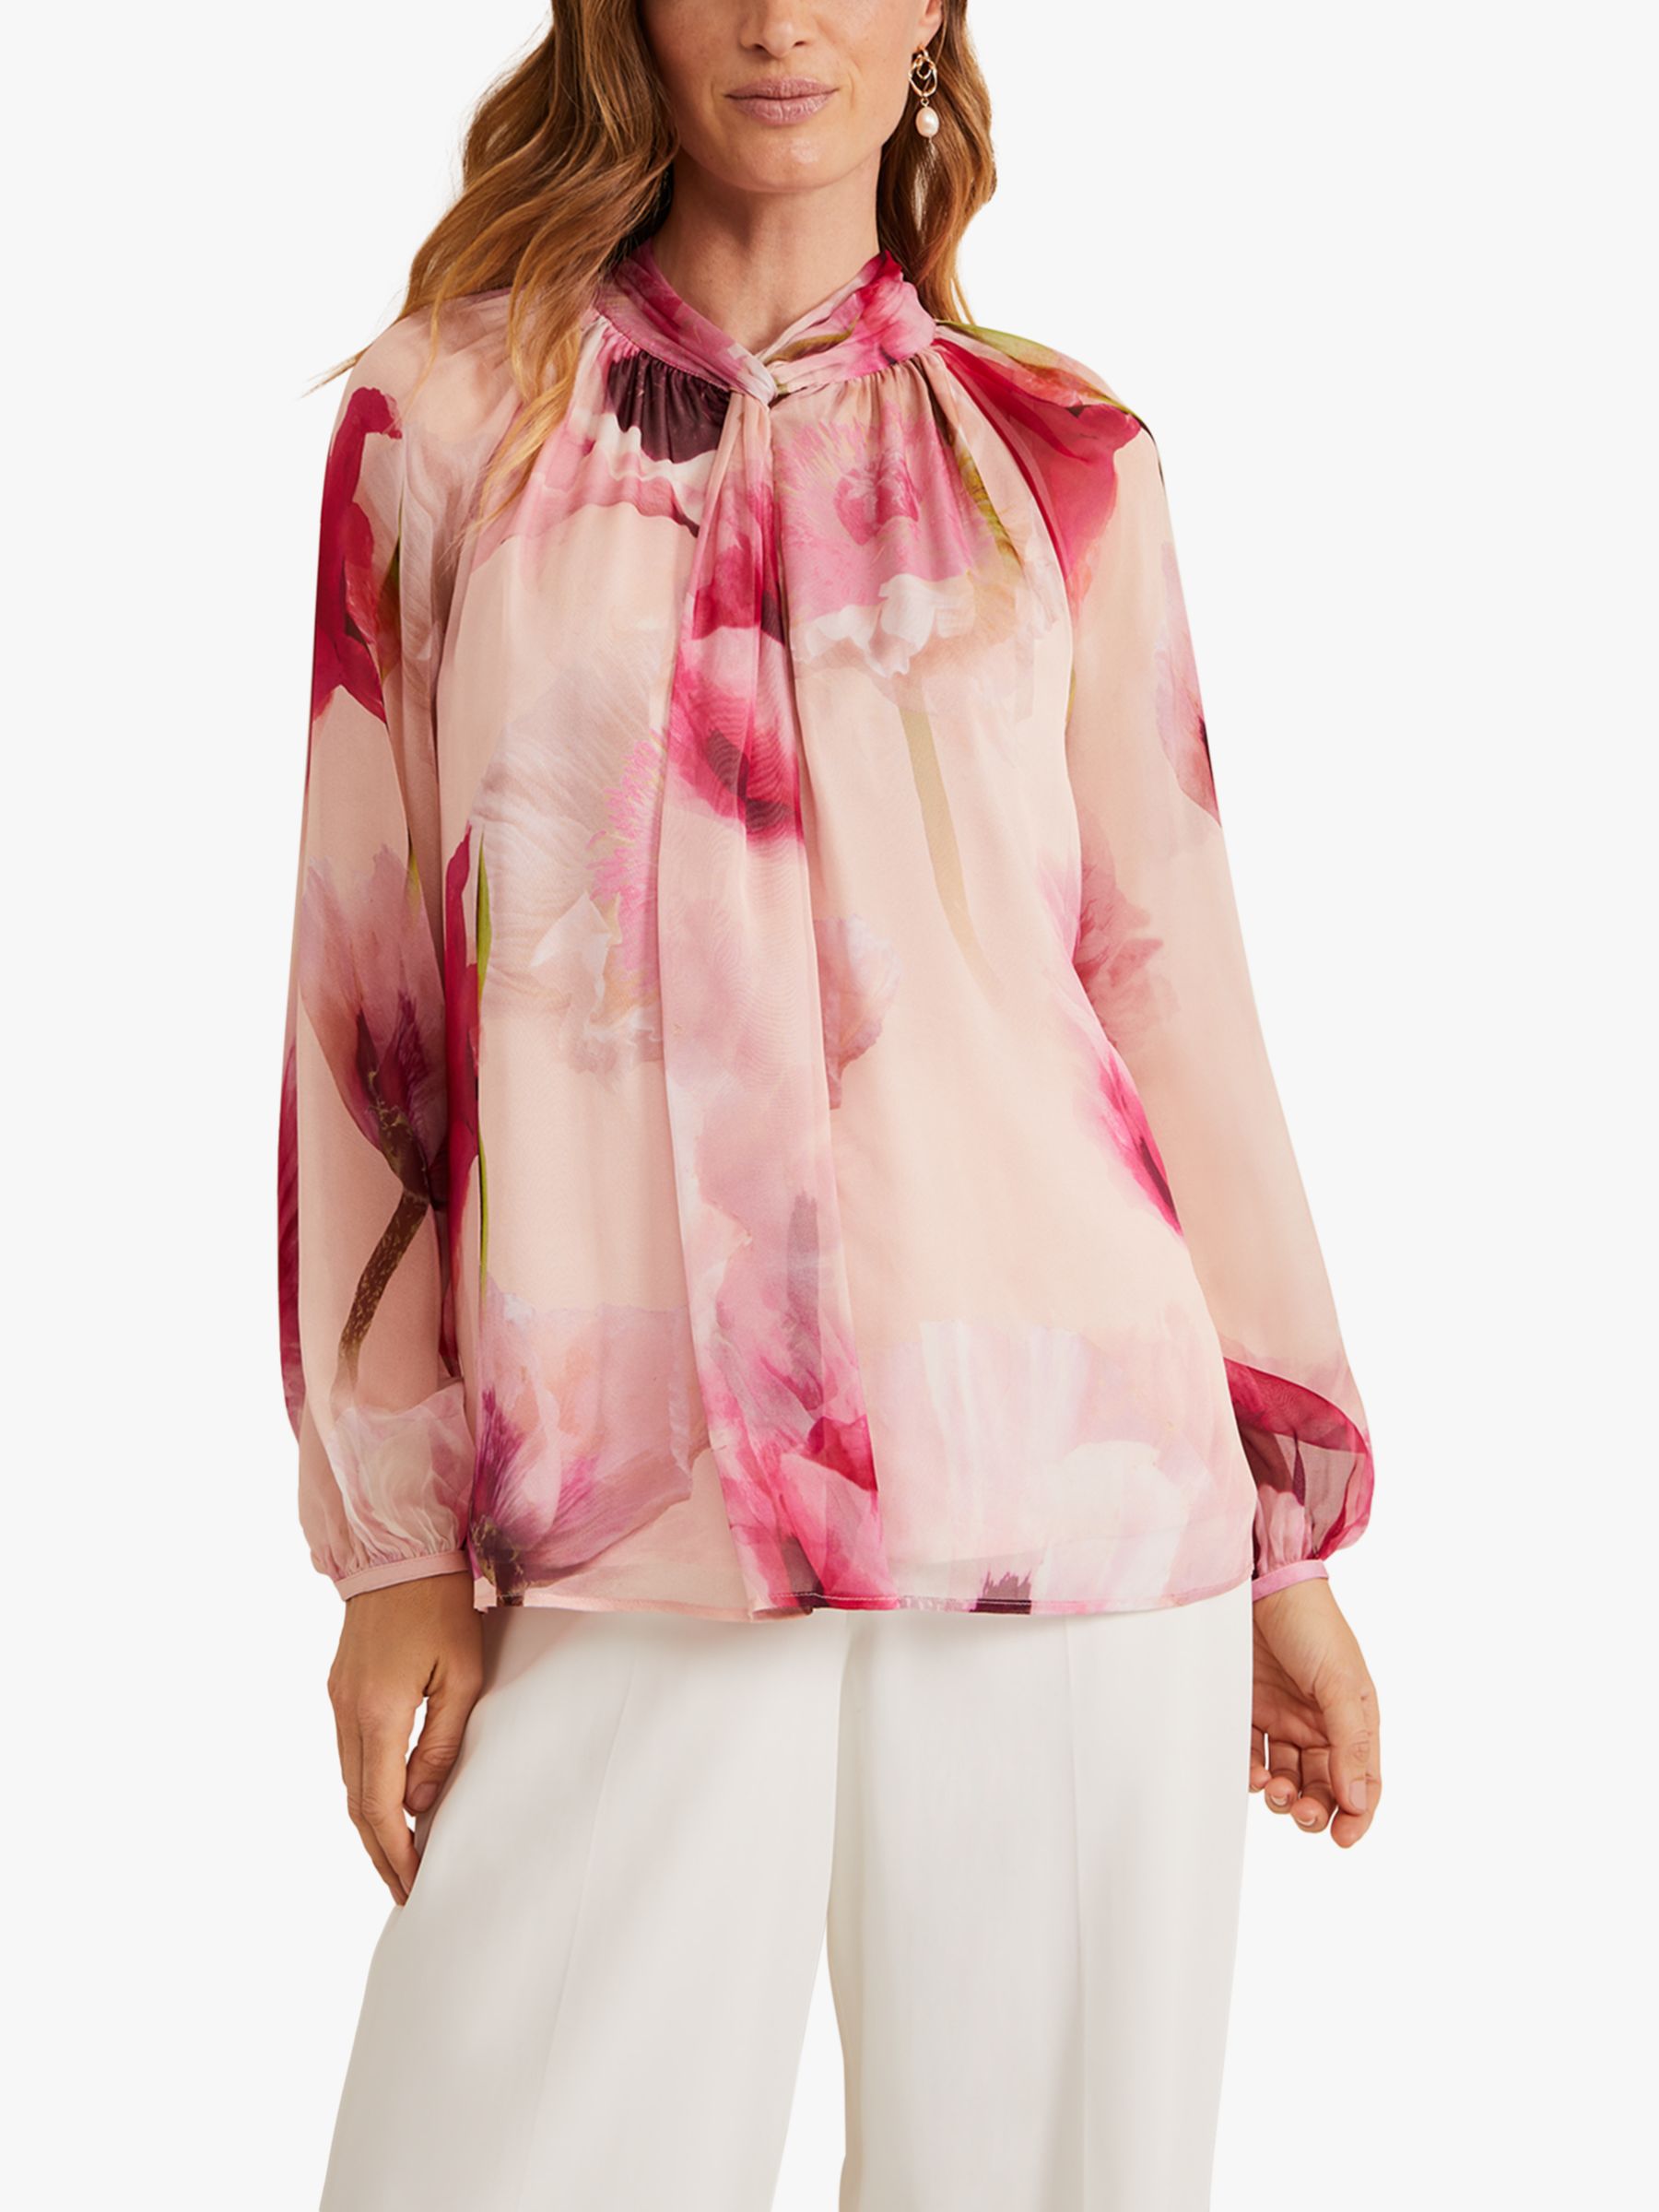 Phase Eight Poppy Floral Silk Blouse, Pink/Multi, 8